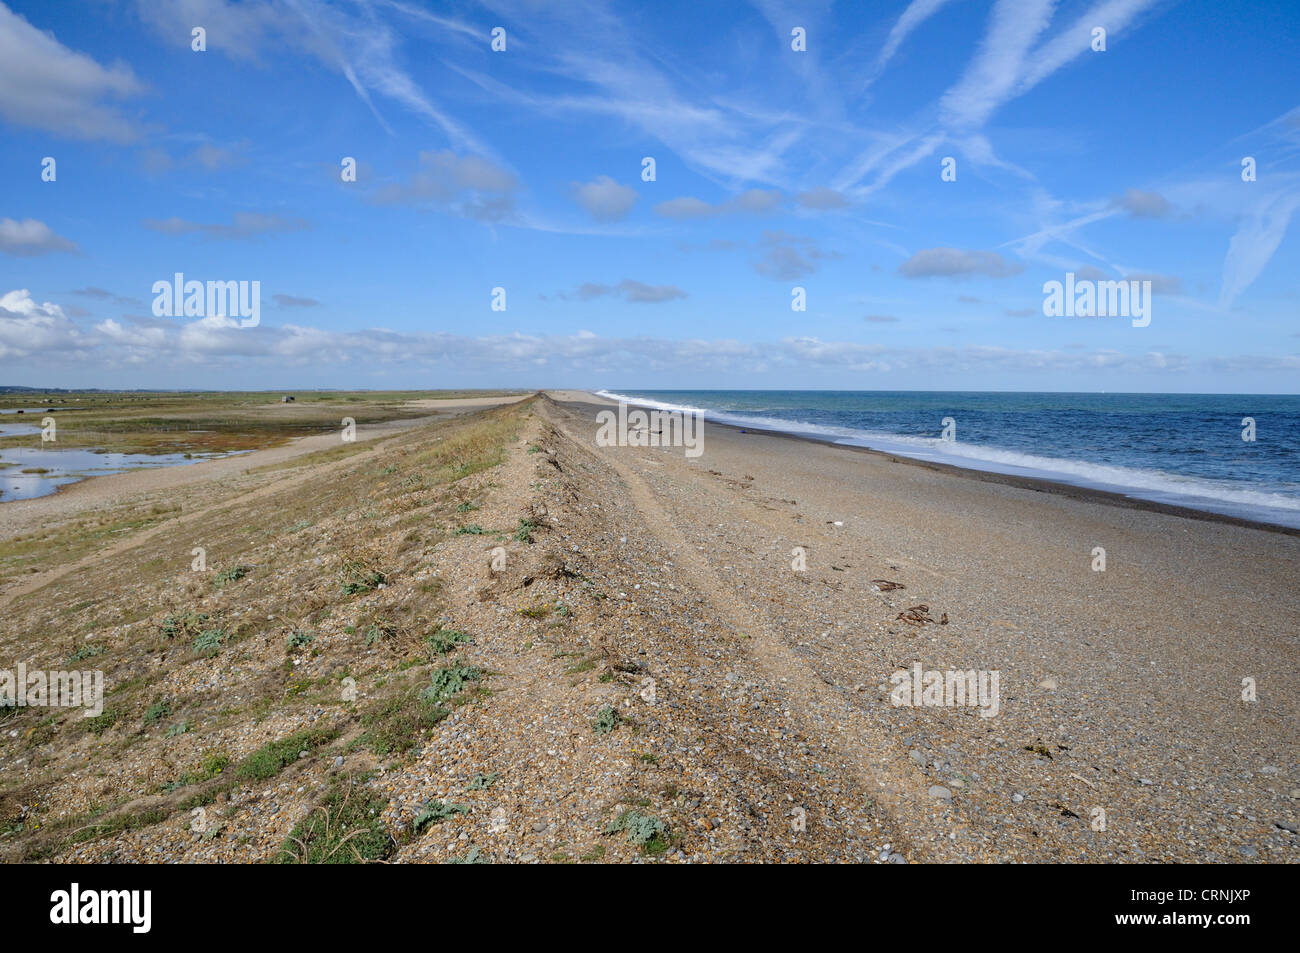 Shingle sea bank at Norfolk Wildlife Trust (NWT) Cley Marshes Cley nature Reserve separating grazing marsh and the sea. Stock Photo